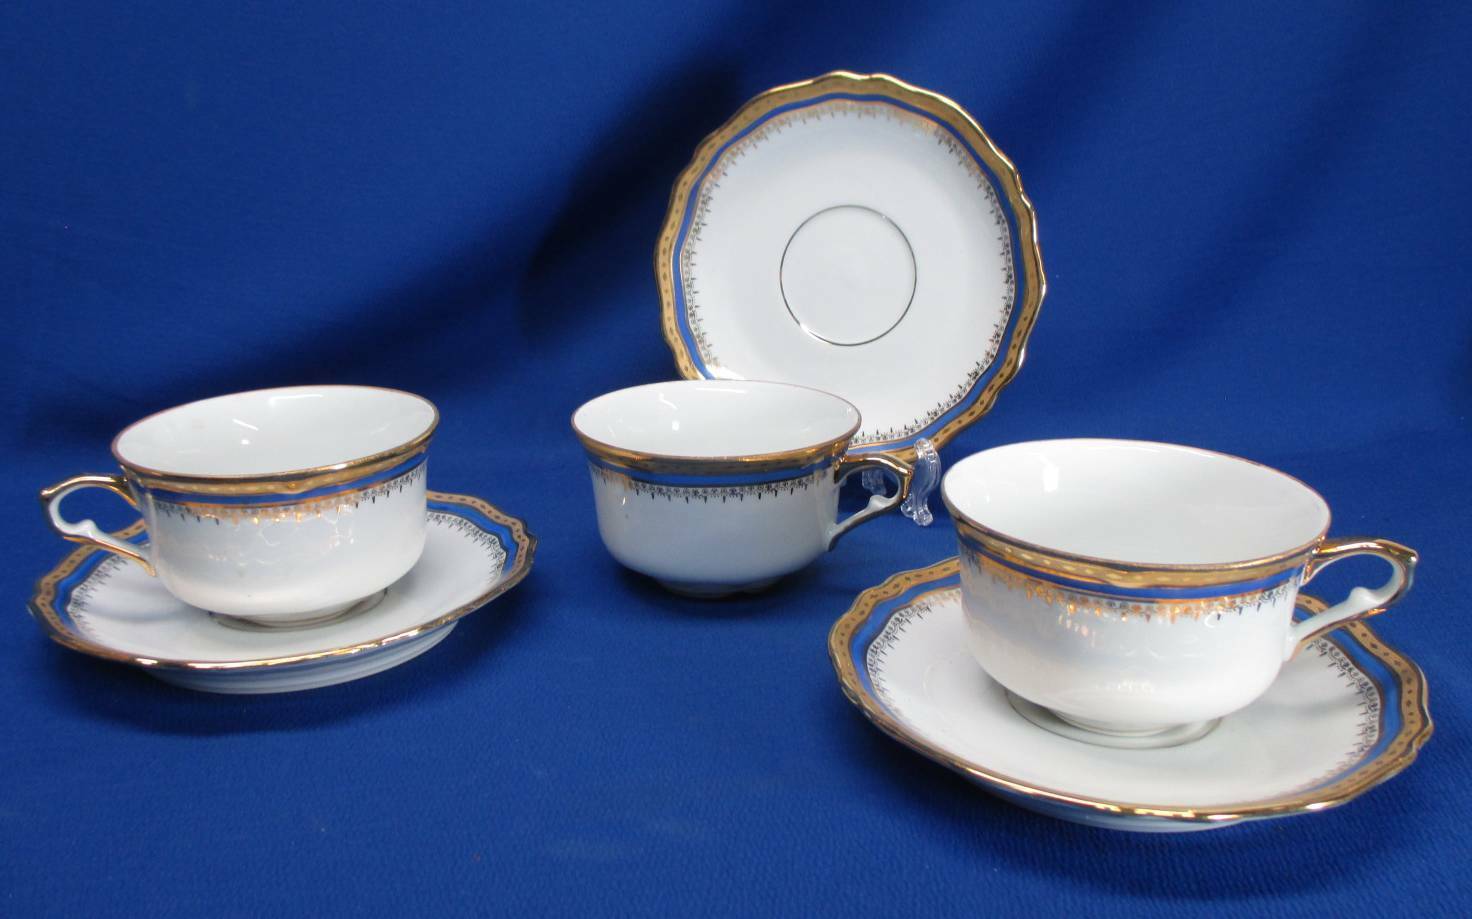 SET OF 3 PENICAUD & SAVARRY LIMOGES ROYAL BLUE & HEAVY GOLD CUPS & SAUCERS